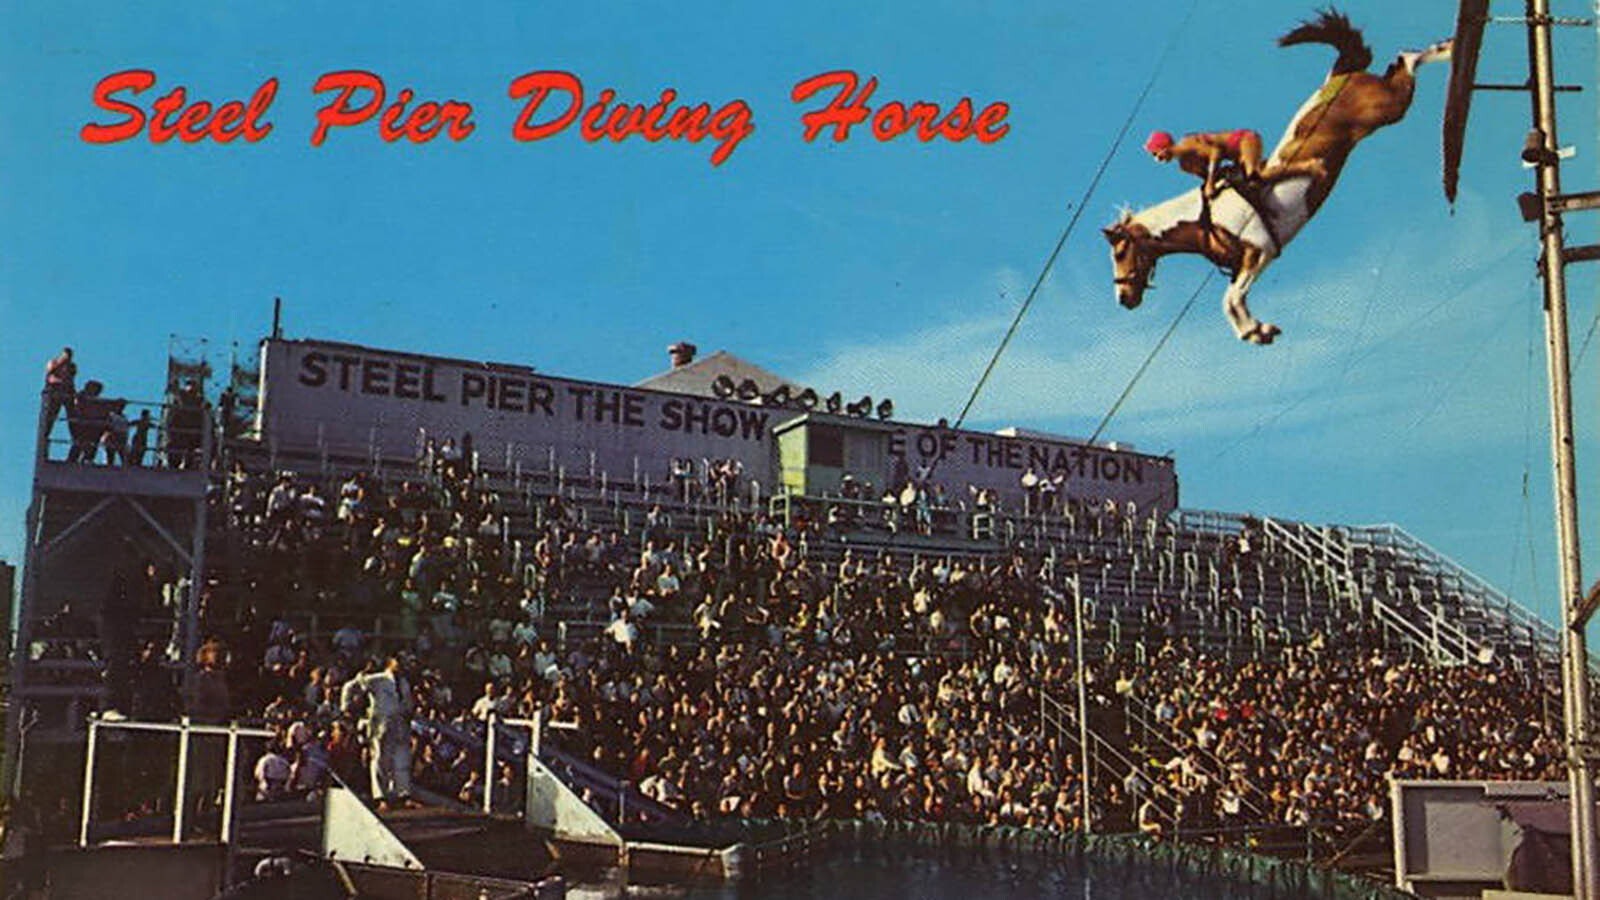 A postcard from the 1960s showcasing the Steel Pier's popular diving horses attraction.